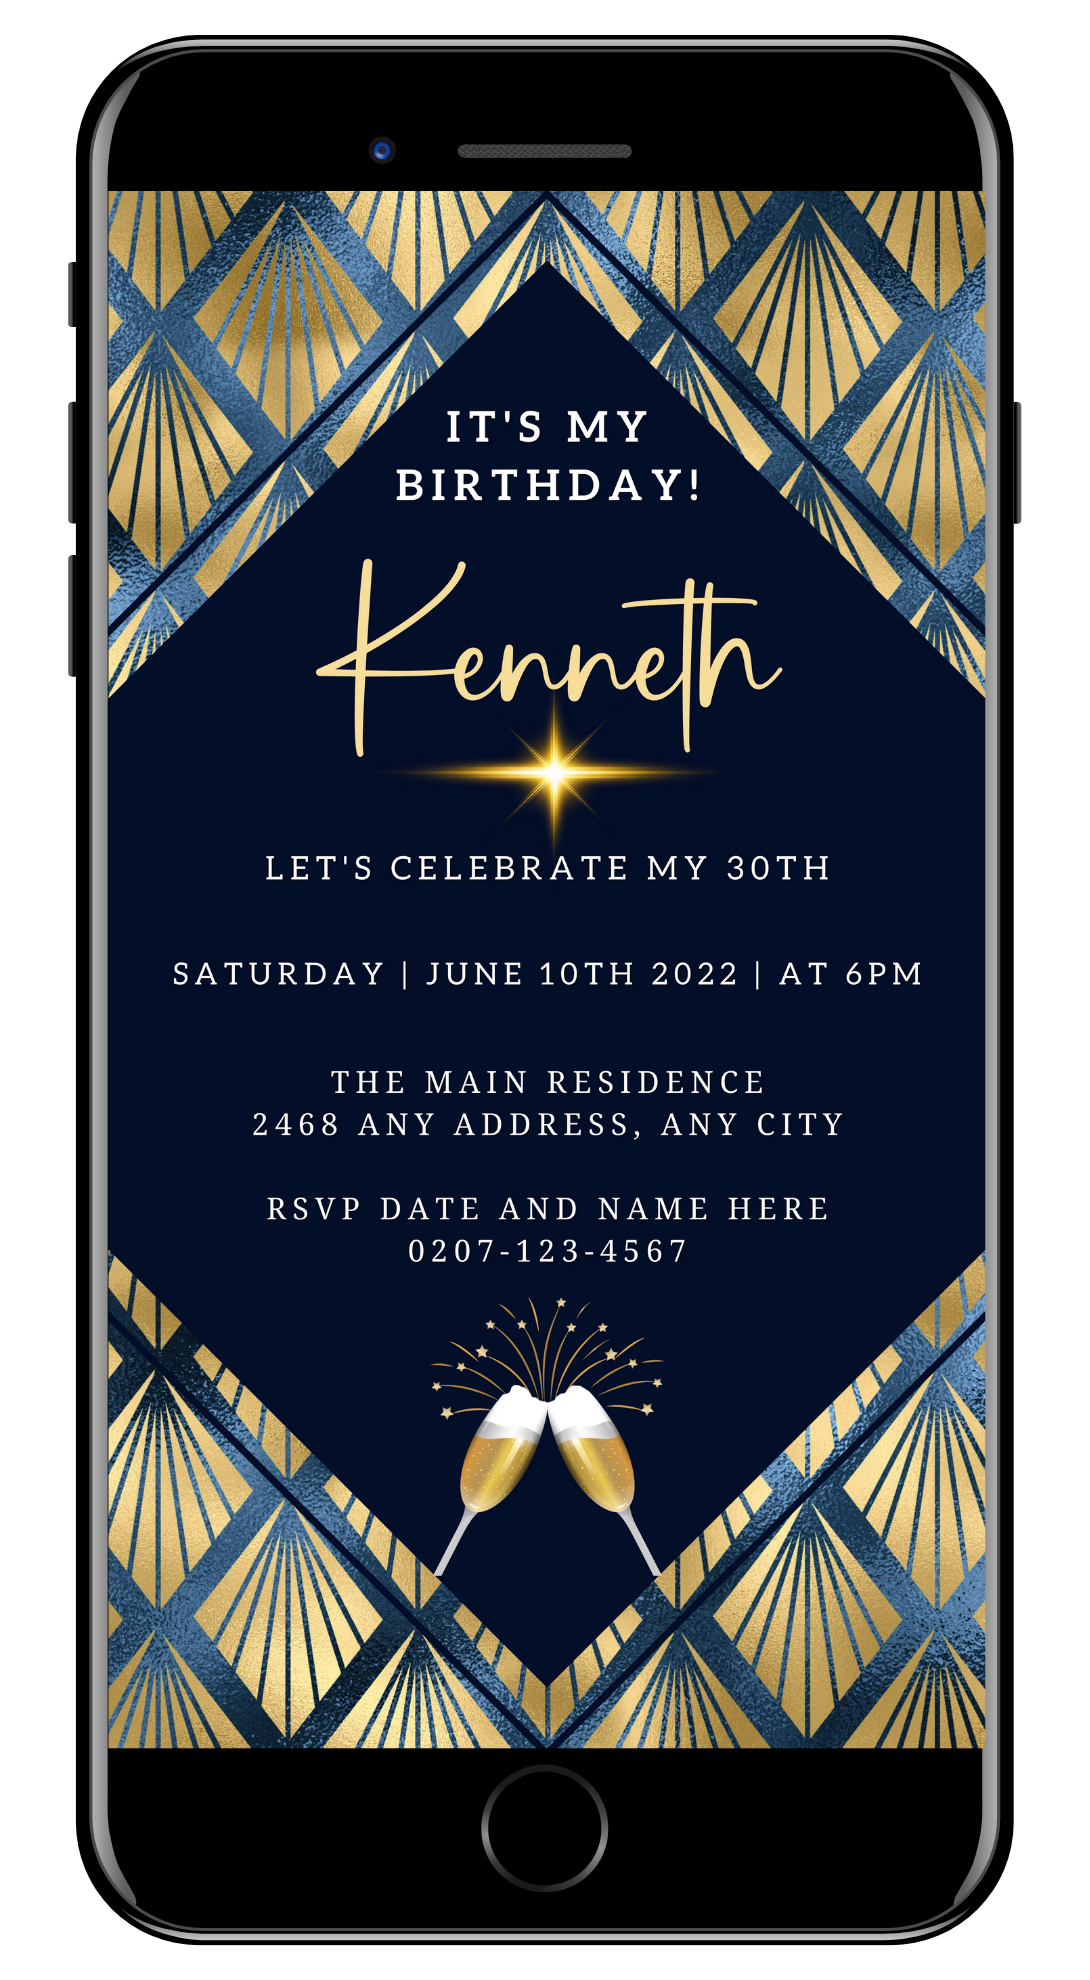 Editable Gold Blue Diamond Art Birthday Party Evite displayed on a smartphone screen with champagne glasses and star accents. Customizable via Canva for digital sharing.